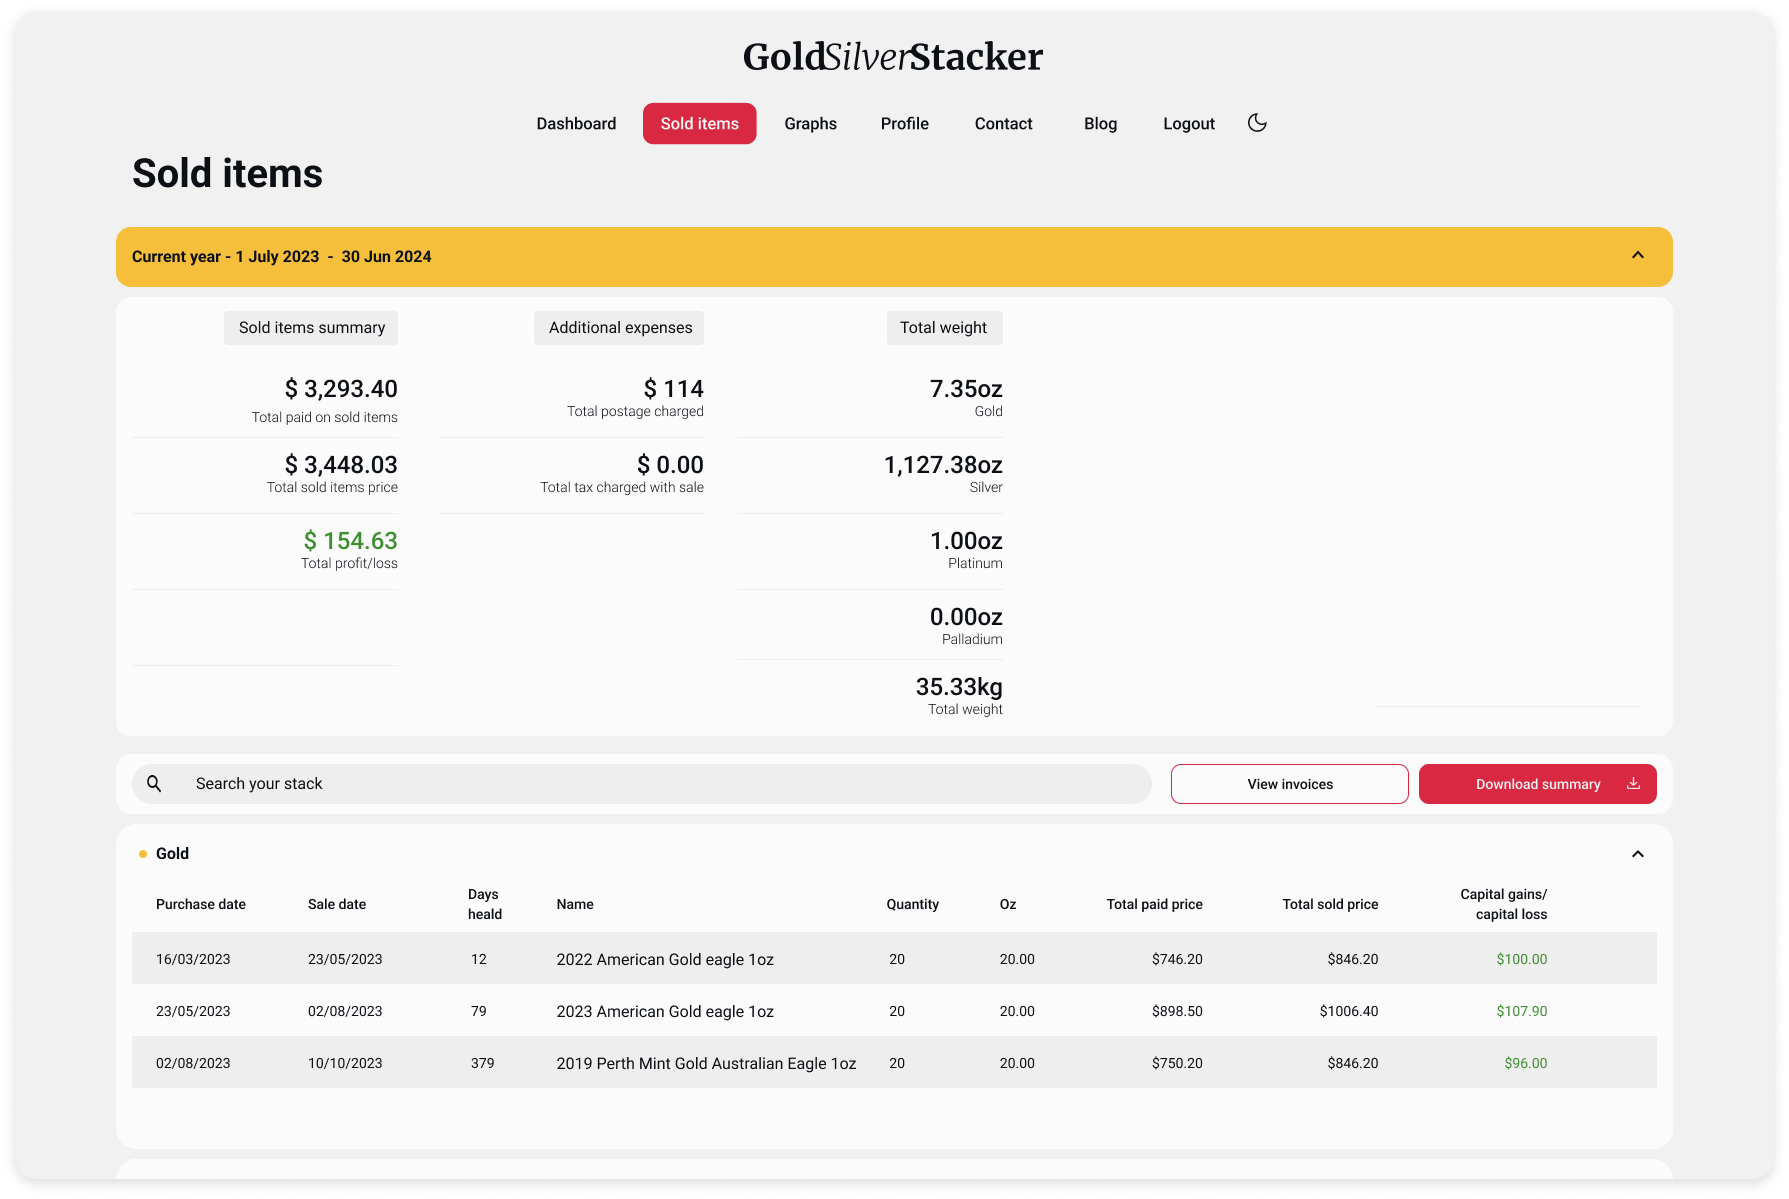 Introducing Exciting New Features on GoldSilverStacker.com